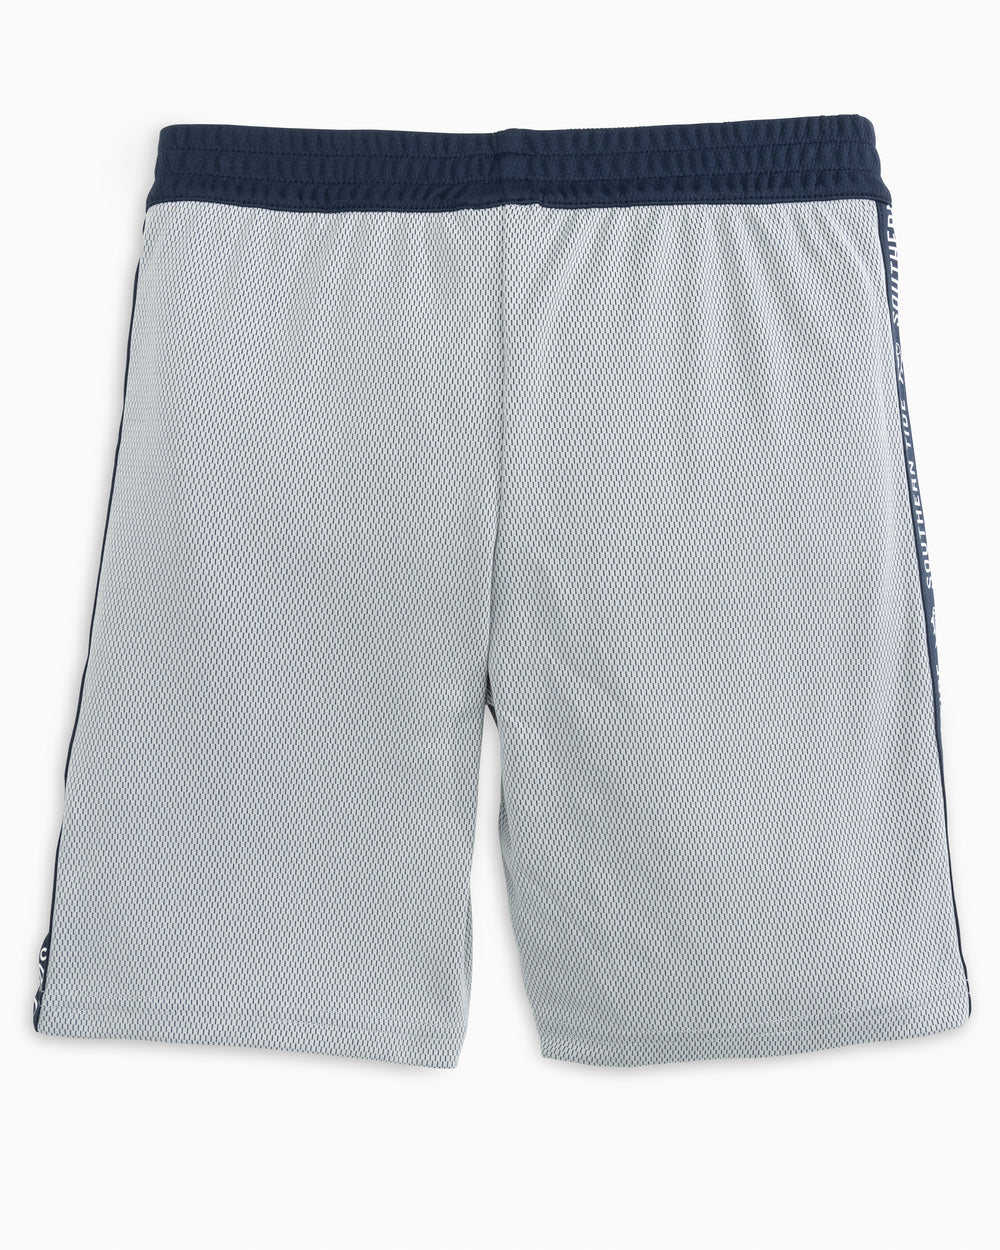 The back view of the Kid's Melink Short by Southern Tide - Seagull Grey